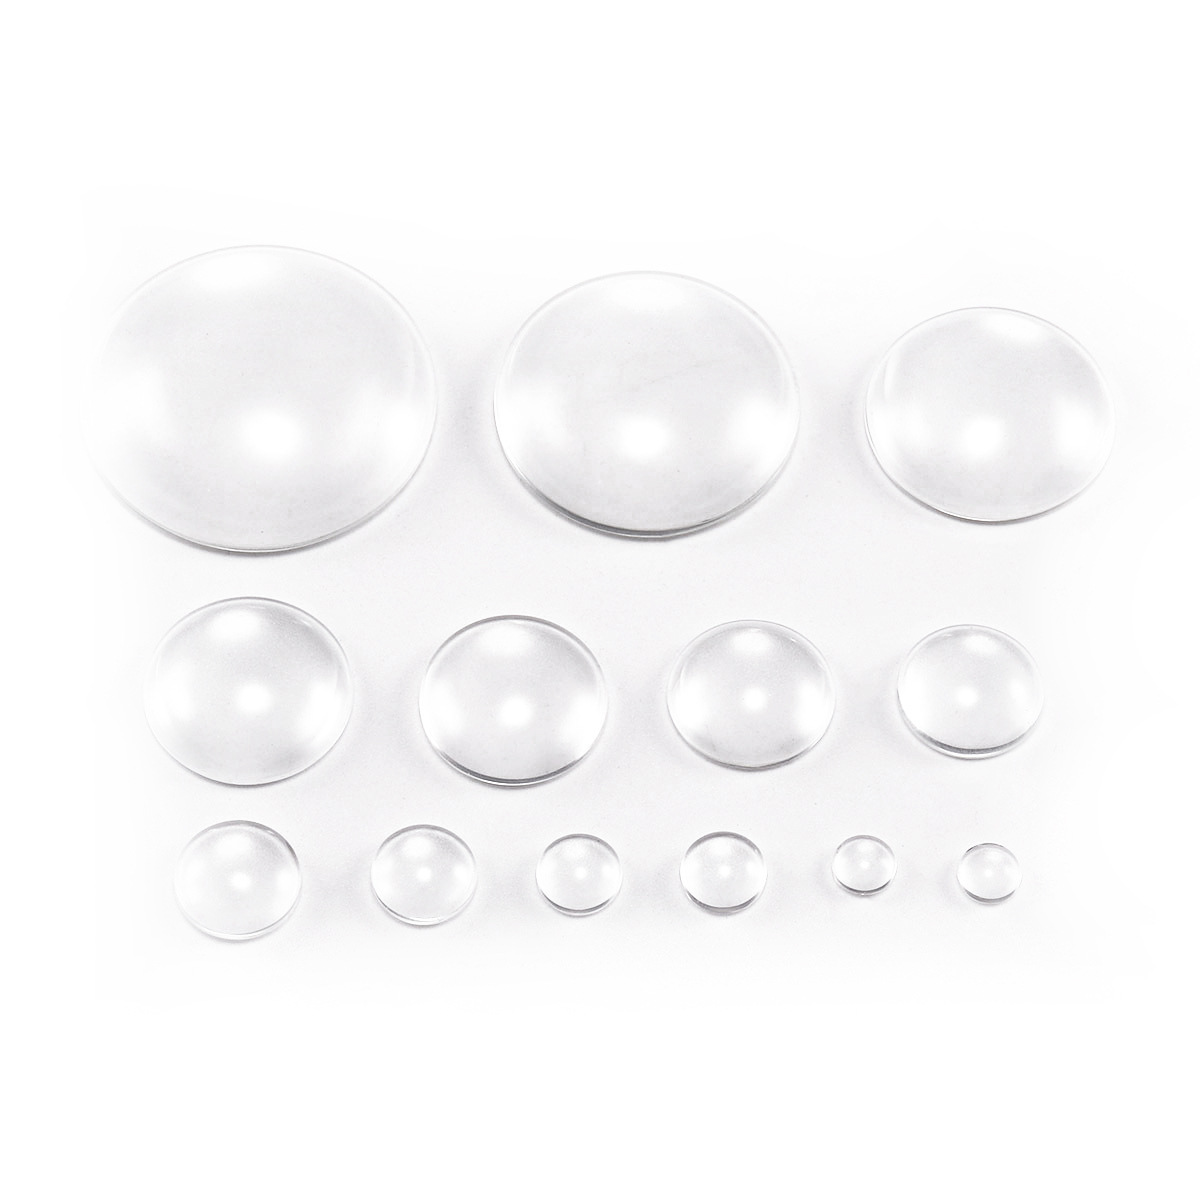 30PCS Clear Glass Cabochons 1 Inch Dome Tile Clear Glass Pebbles  Non-Calibrated Round Gems for Crafts Cameo Pendants Photo Jewelry Rings  Necklaces 1 inch/ 25mm